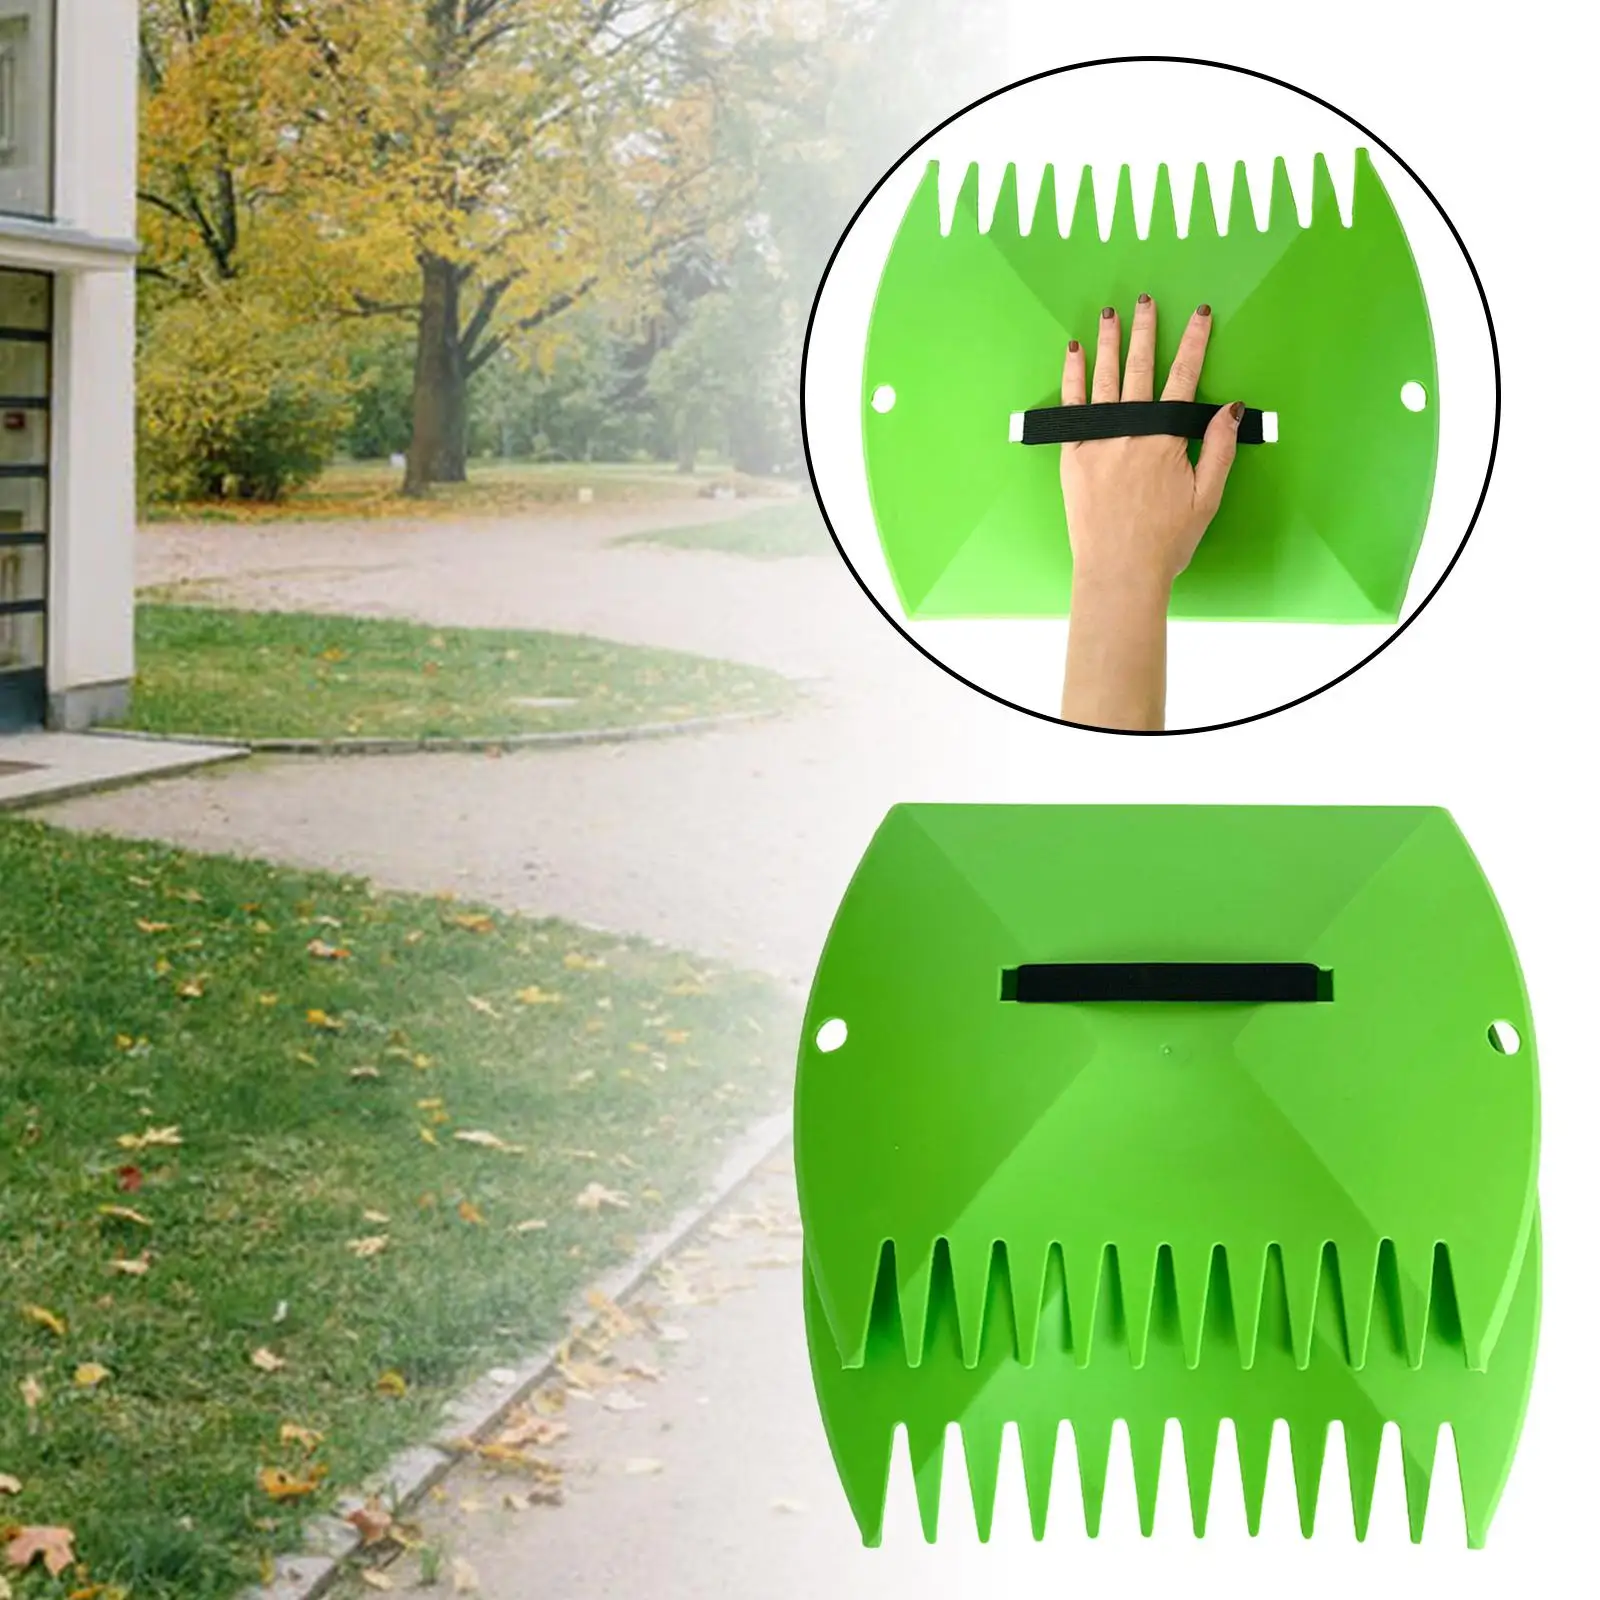 Leaves Grabber Multiple Use Hand Rake Rubbish Pick up Tool Leaves Collector for Picking up Leaves